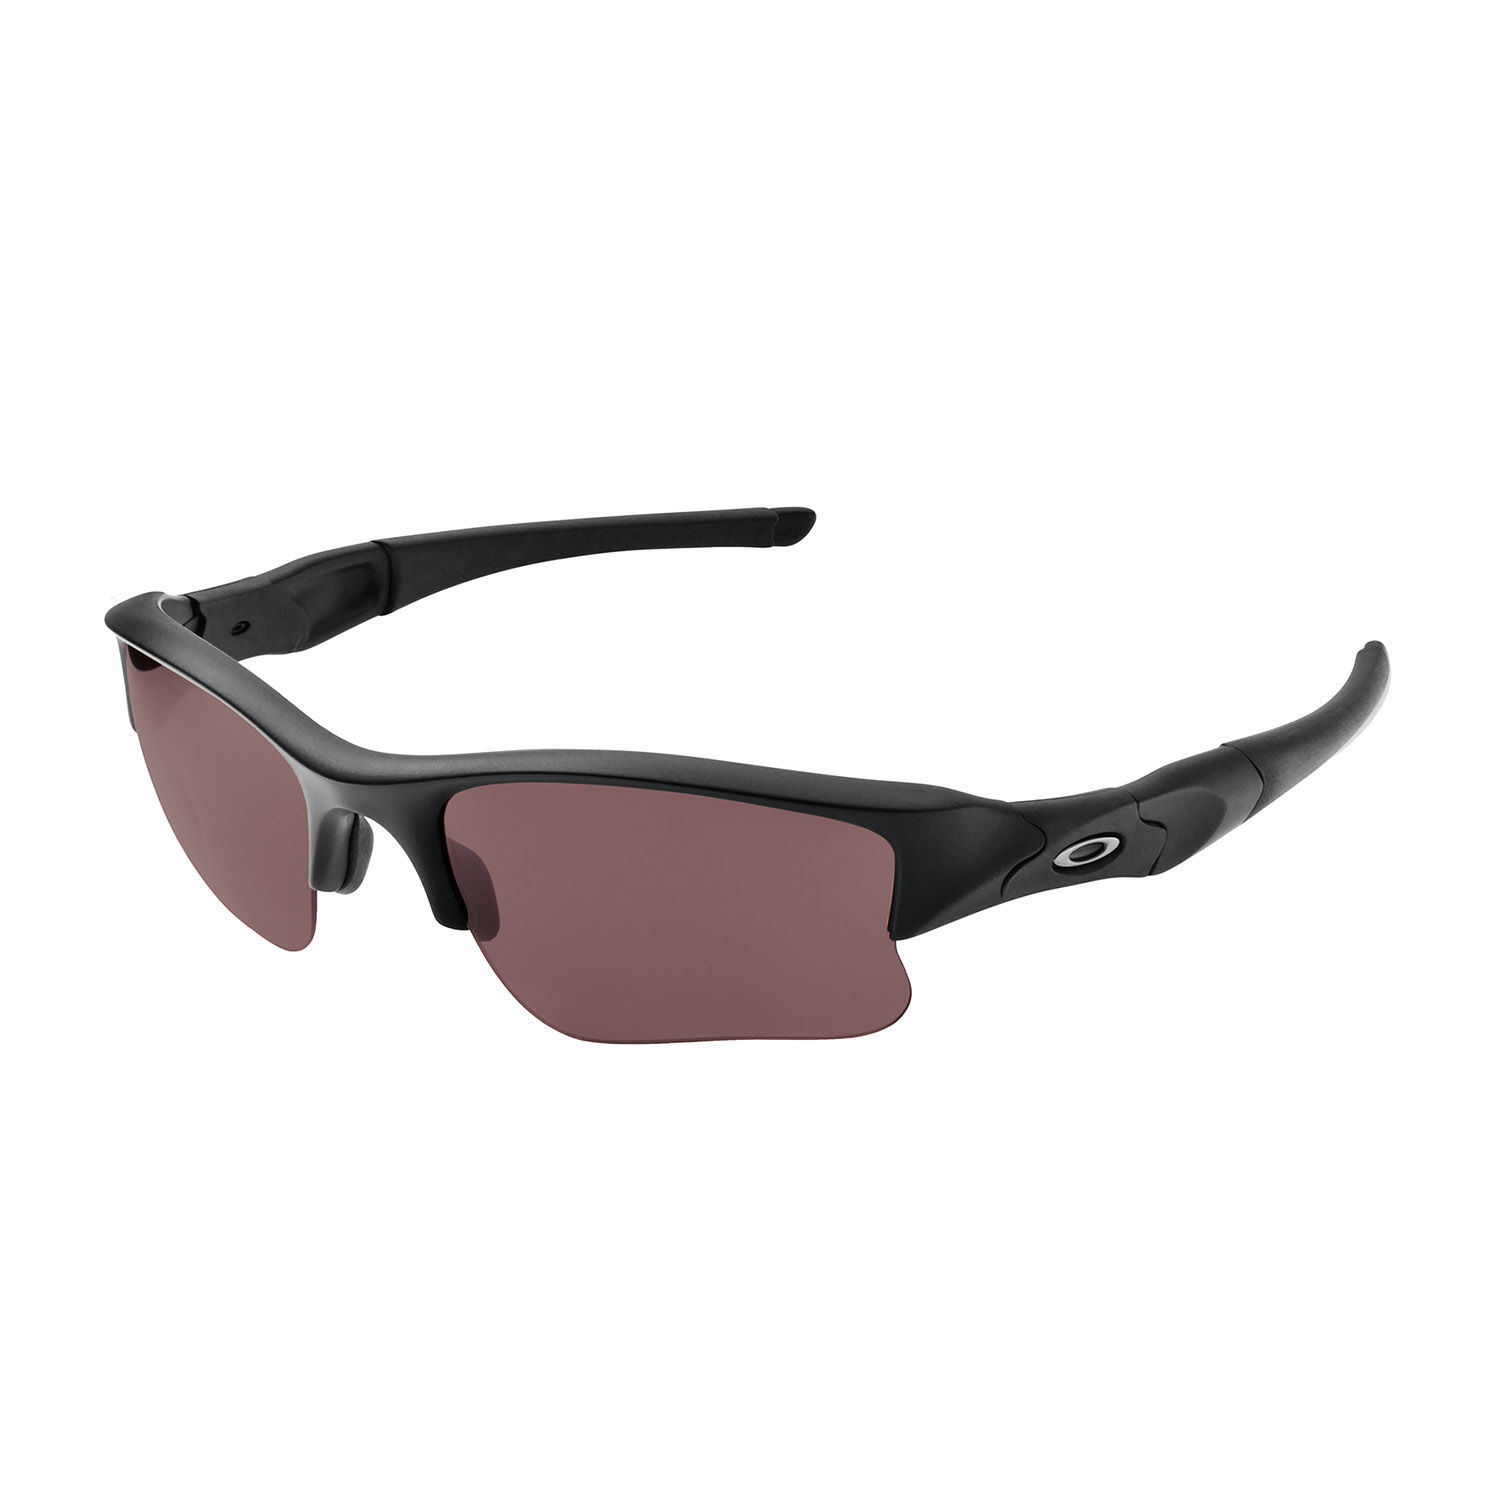 Oakley SI Prizm - Accessories - Accessories - News - all4shooters.com